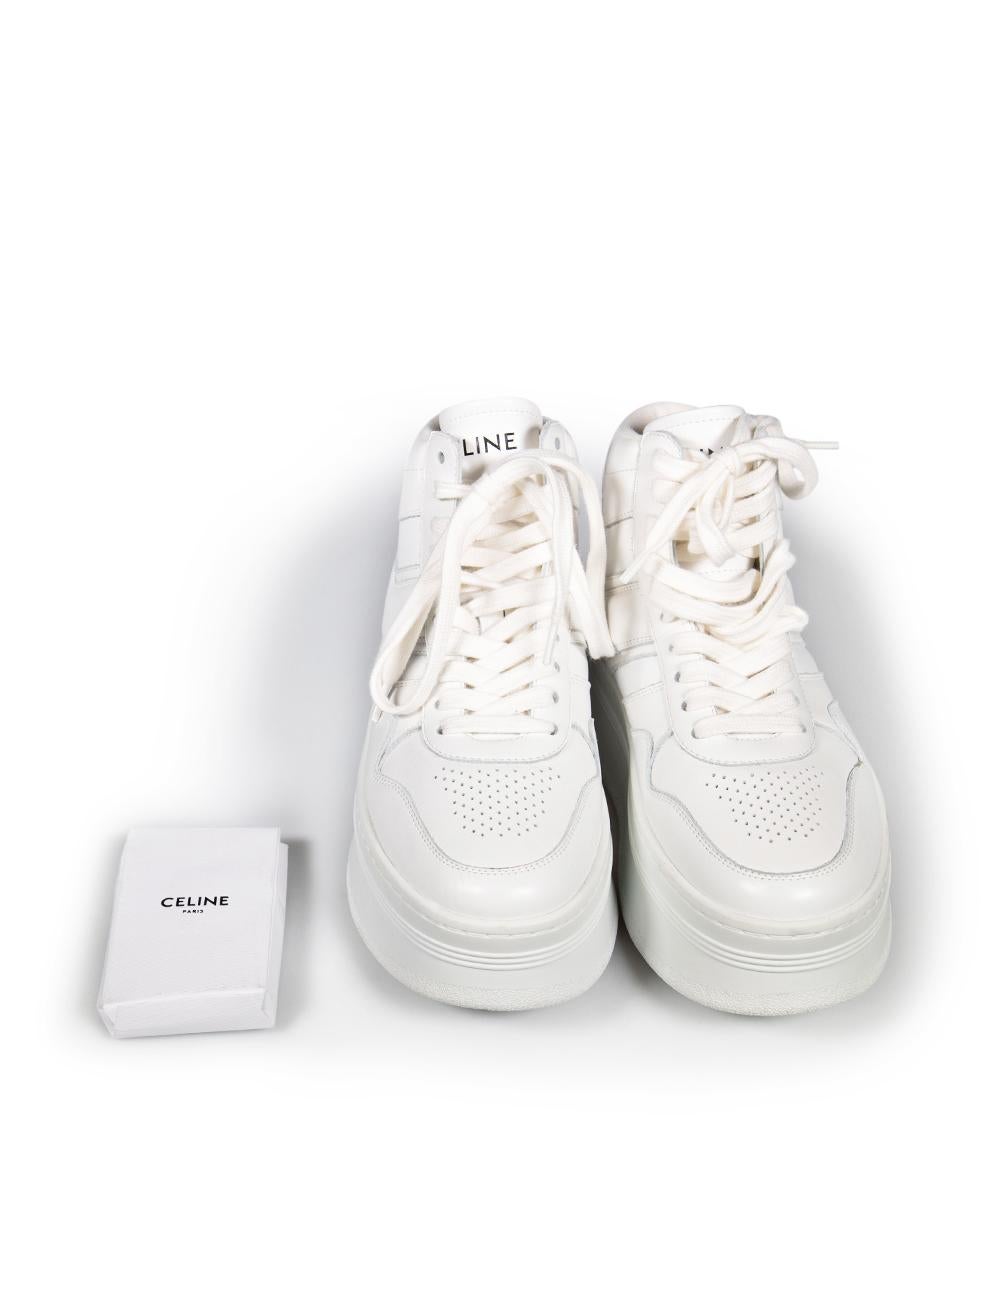 Céline White Leather High Top Platform Trainers Size IT 35 For Sale 3